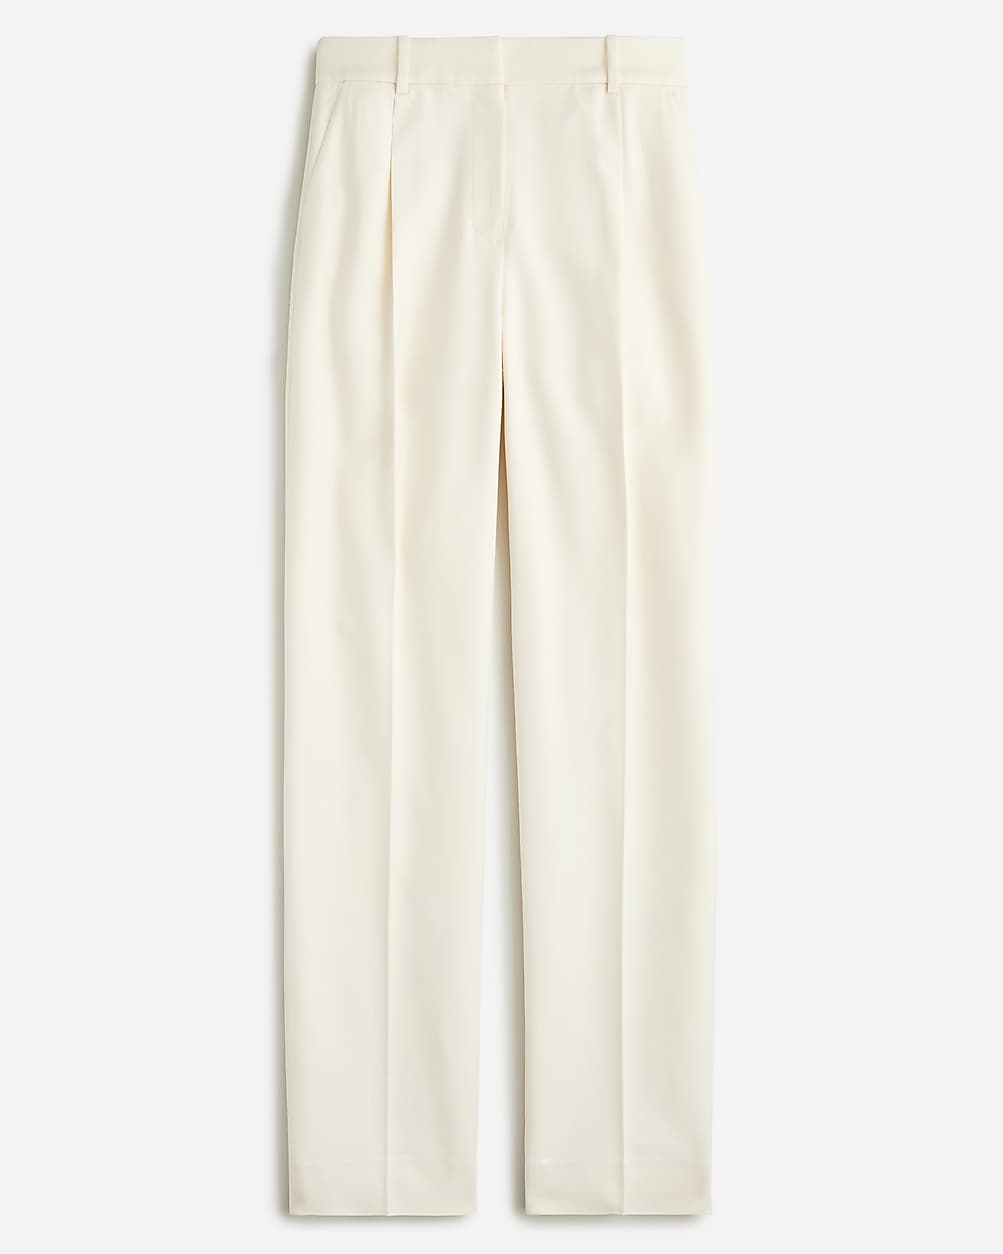 J.Crew: Essential Pant In City Twill For Women